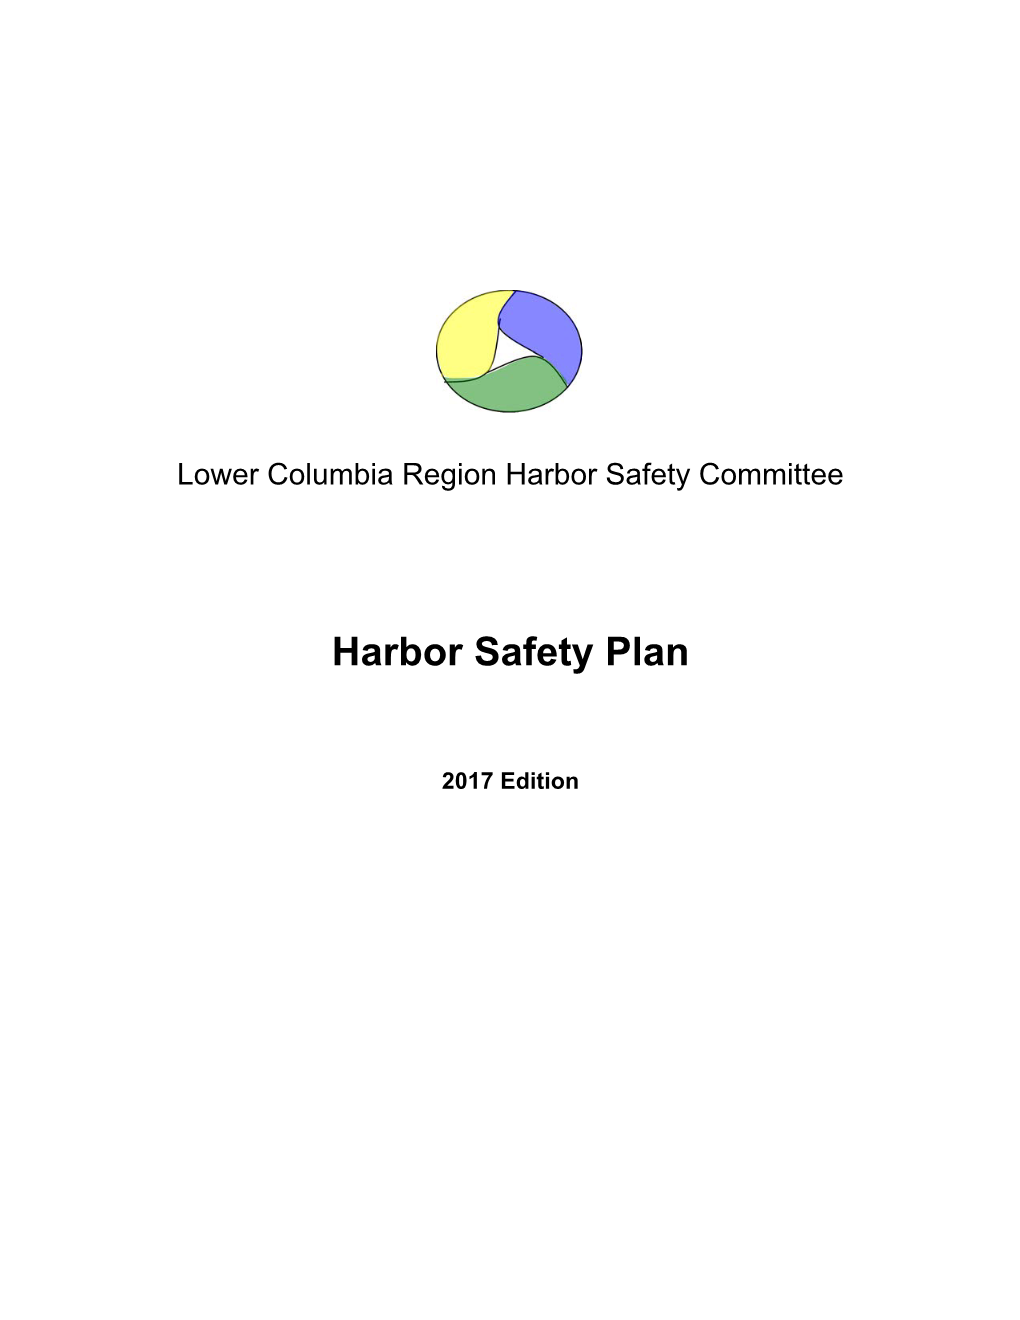 2017 Approved Harbor Safety Plan